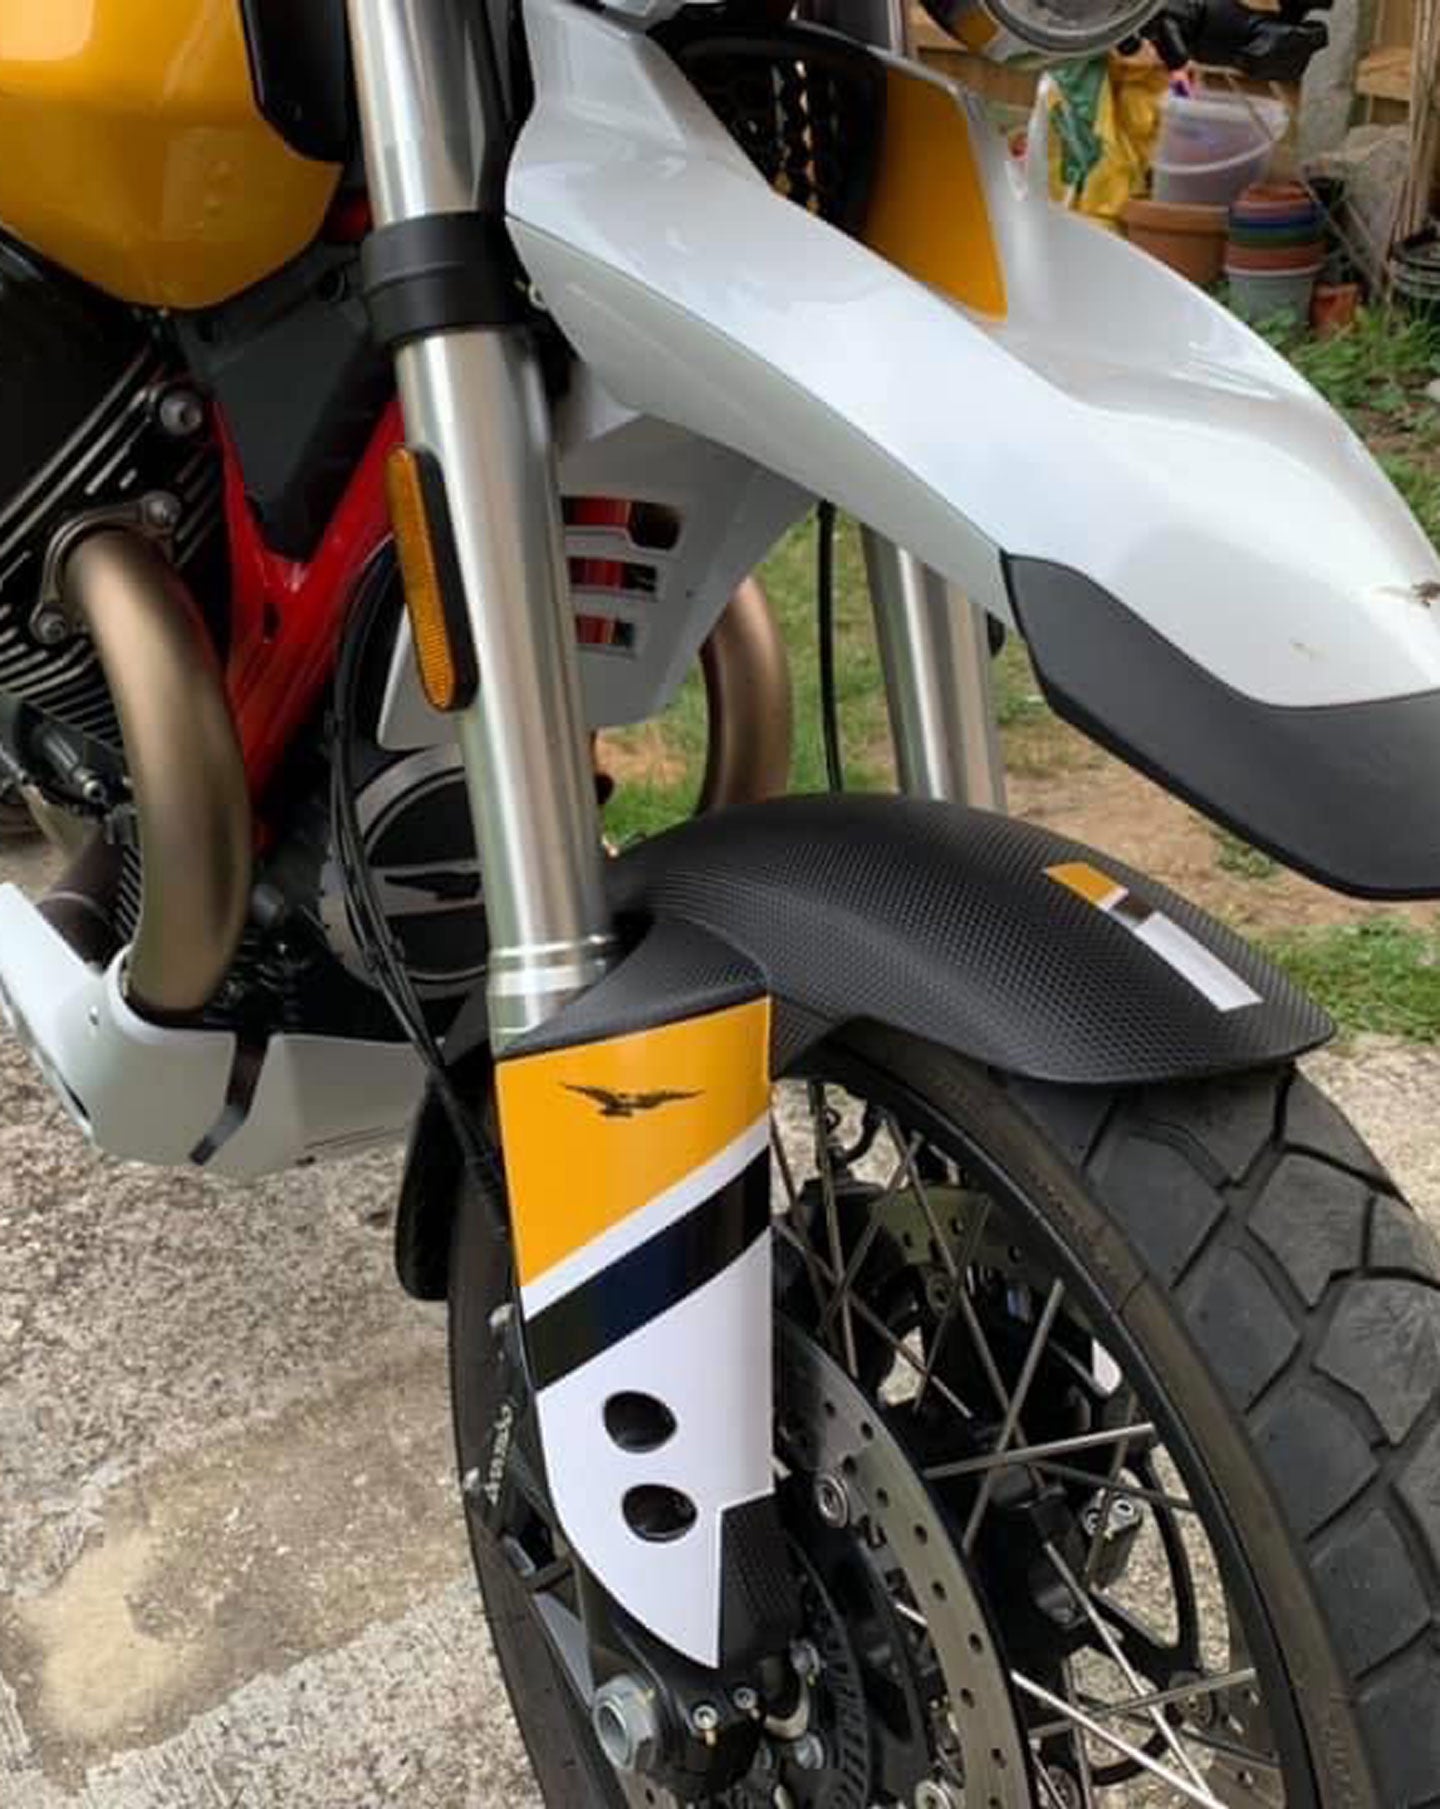 These decals are designed to compliment the Aprilia Caponord Rally front mudguard, often bought as an aftermarket accessory to protect the engine area of the V85TT.